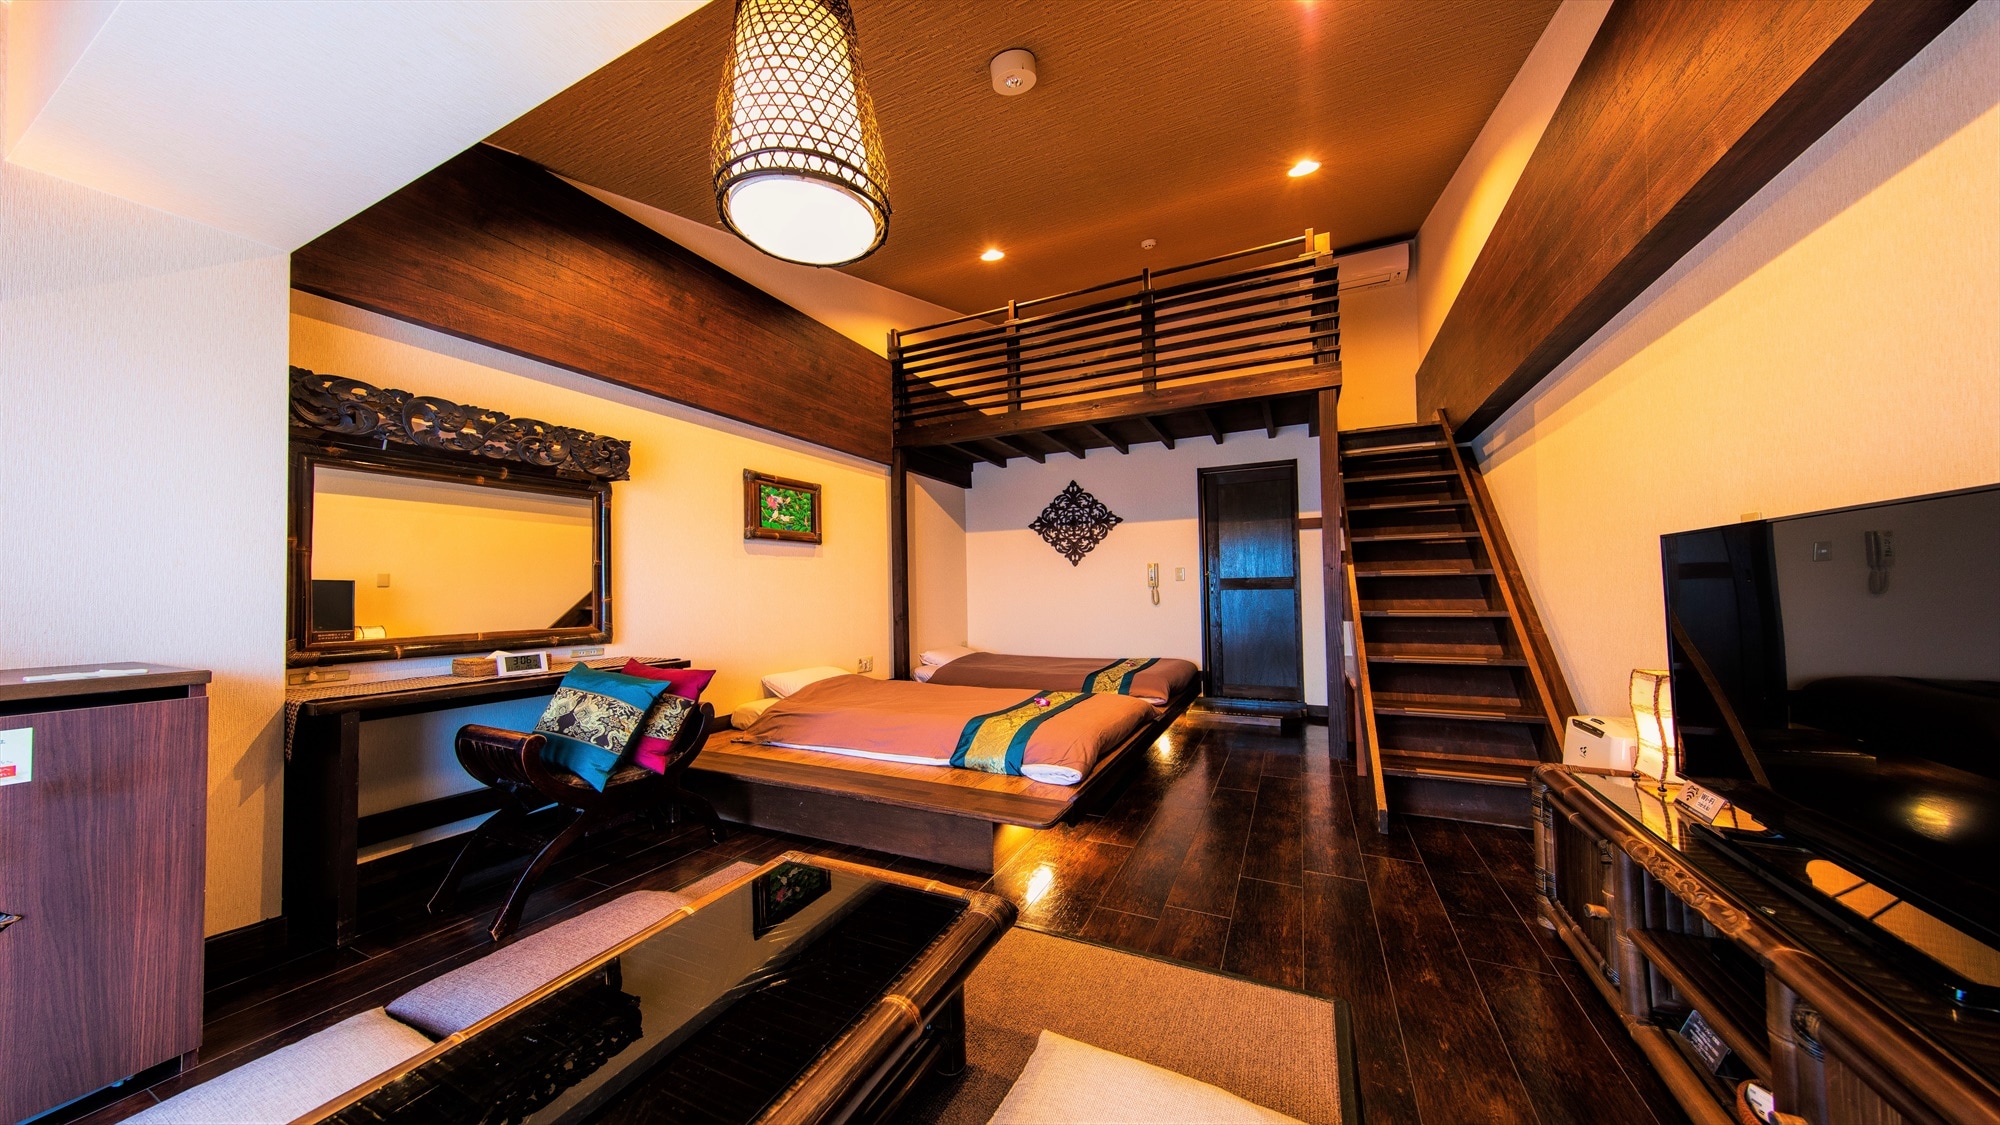 [Main Building 2F] Balinese-style Western-style room with a loft for children's delight